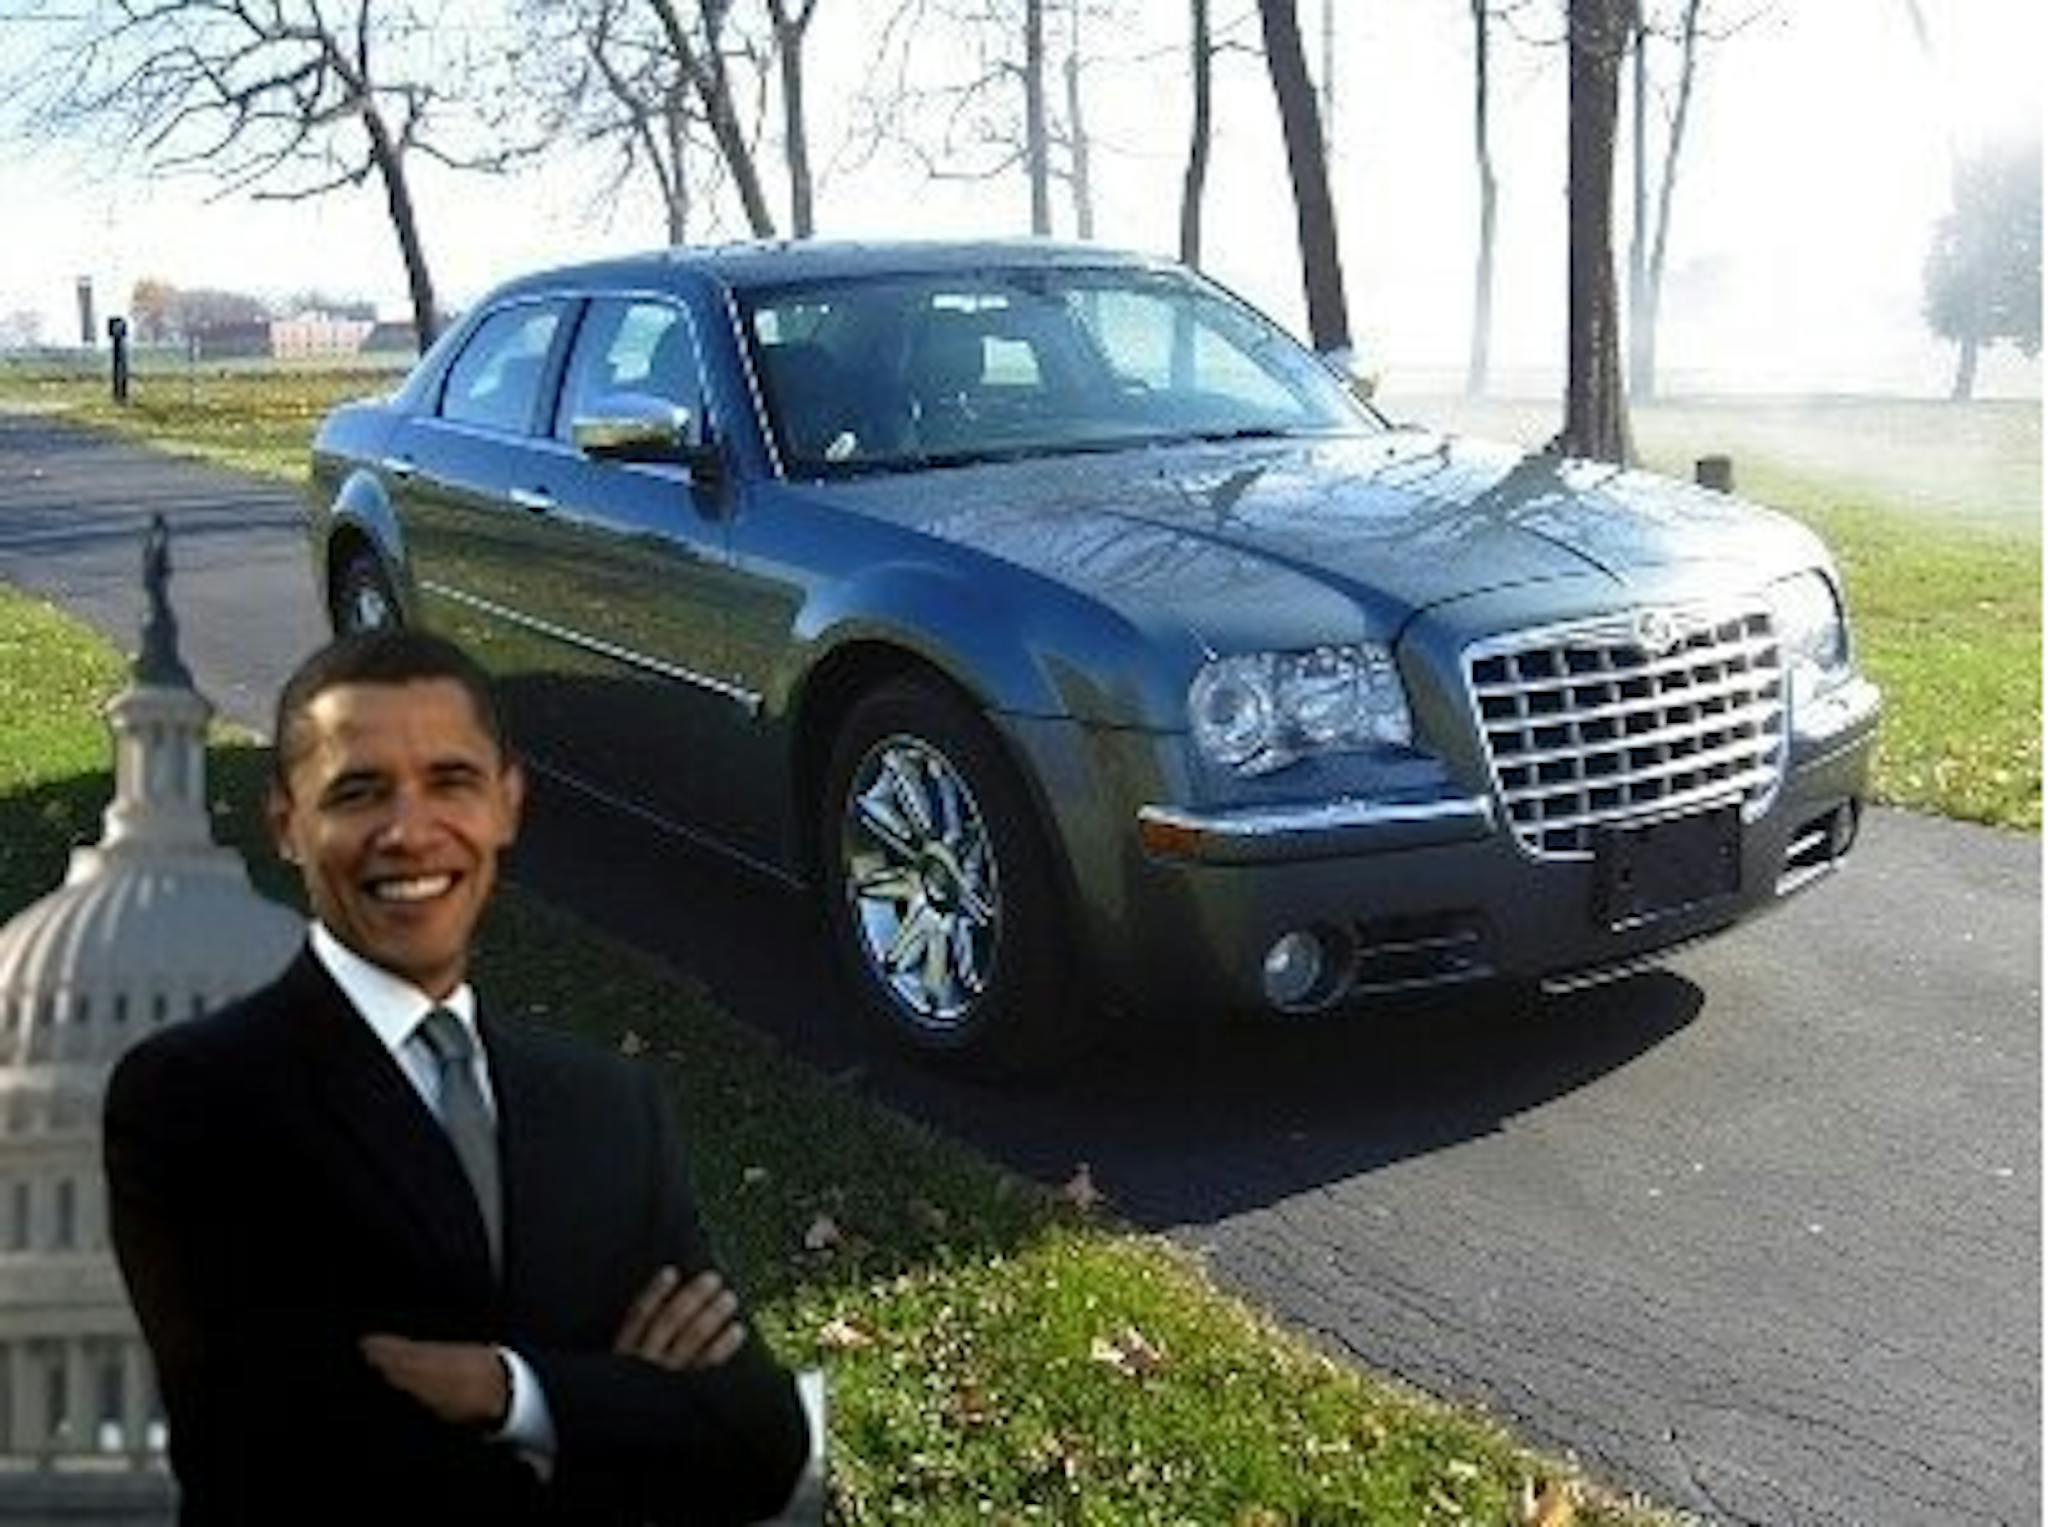 President Obama's car goes up for auction